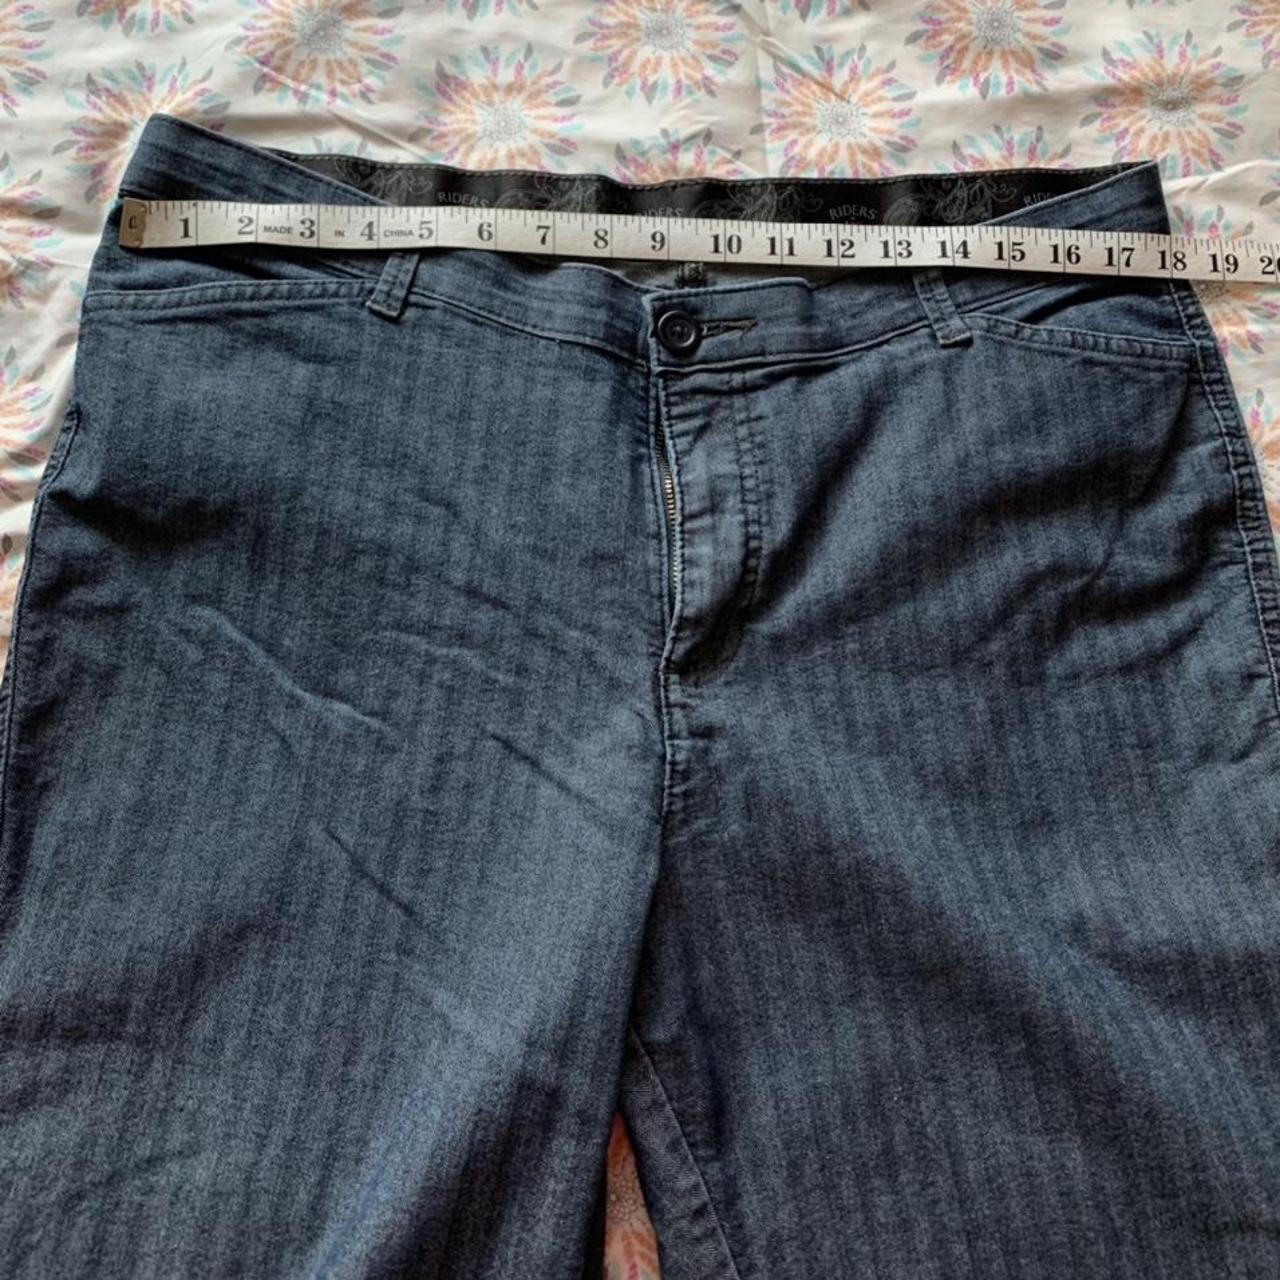 Riders Lee Jeans. Lightweight blue jeans with... - Depop